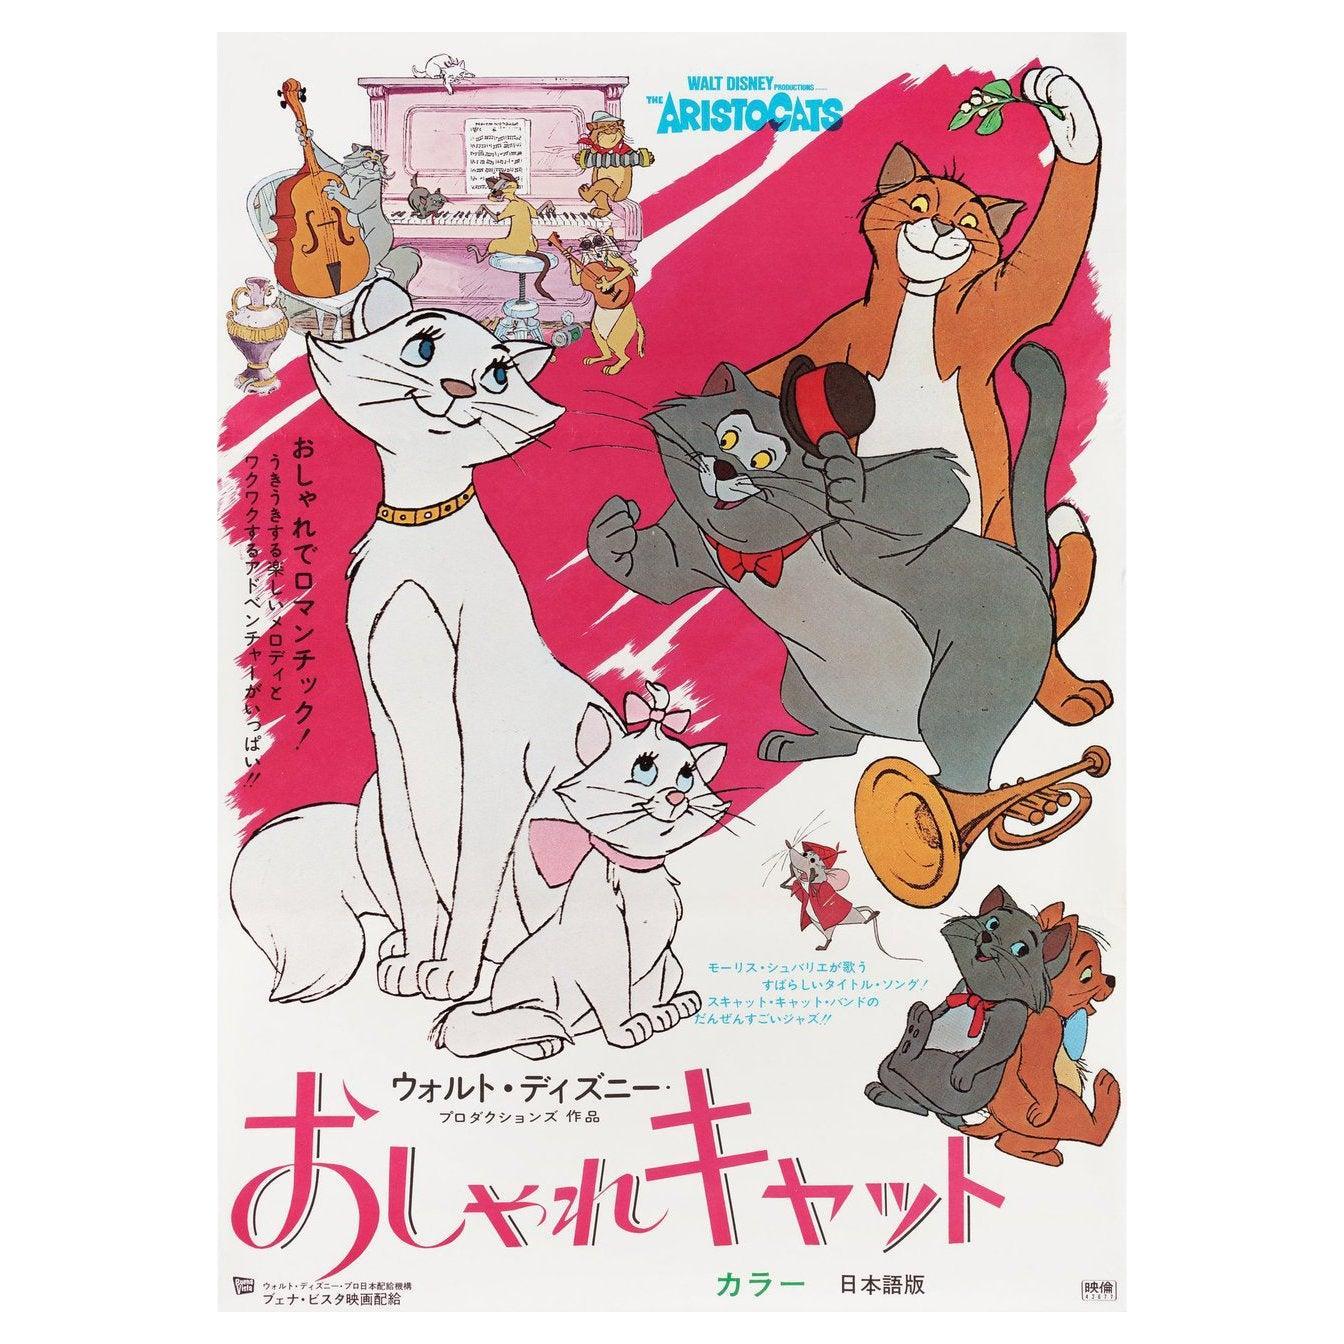 The AristoCats 1970 Japanese B2 Film Poster